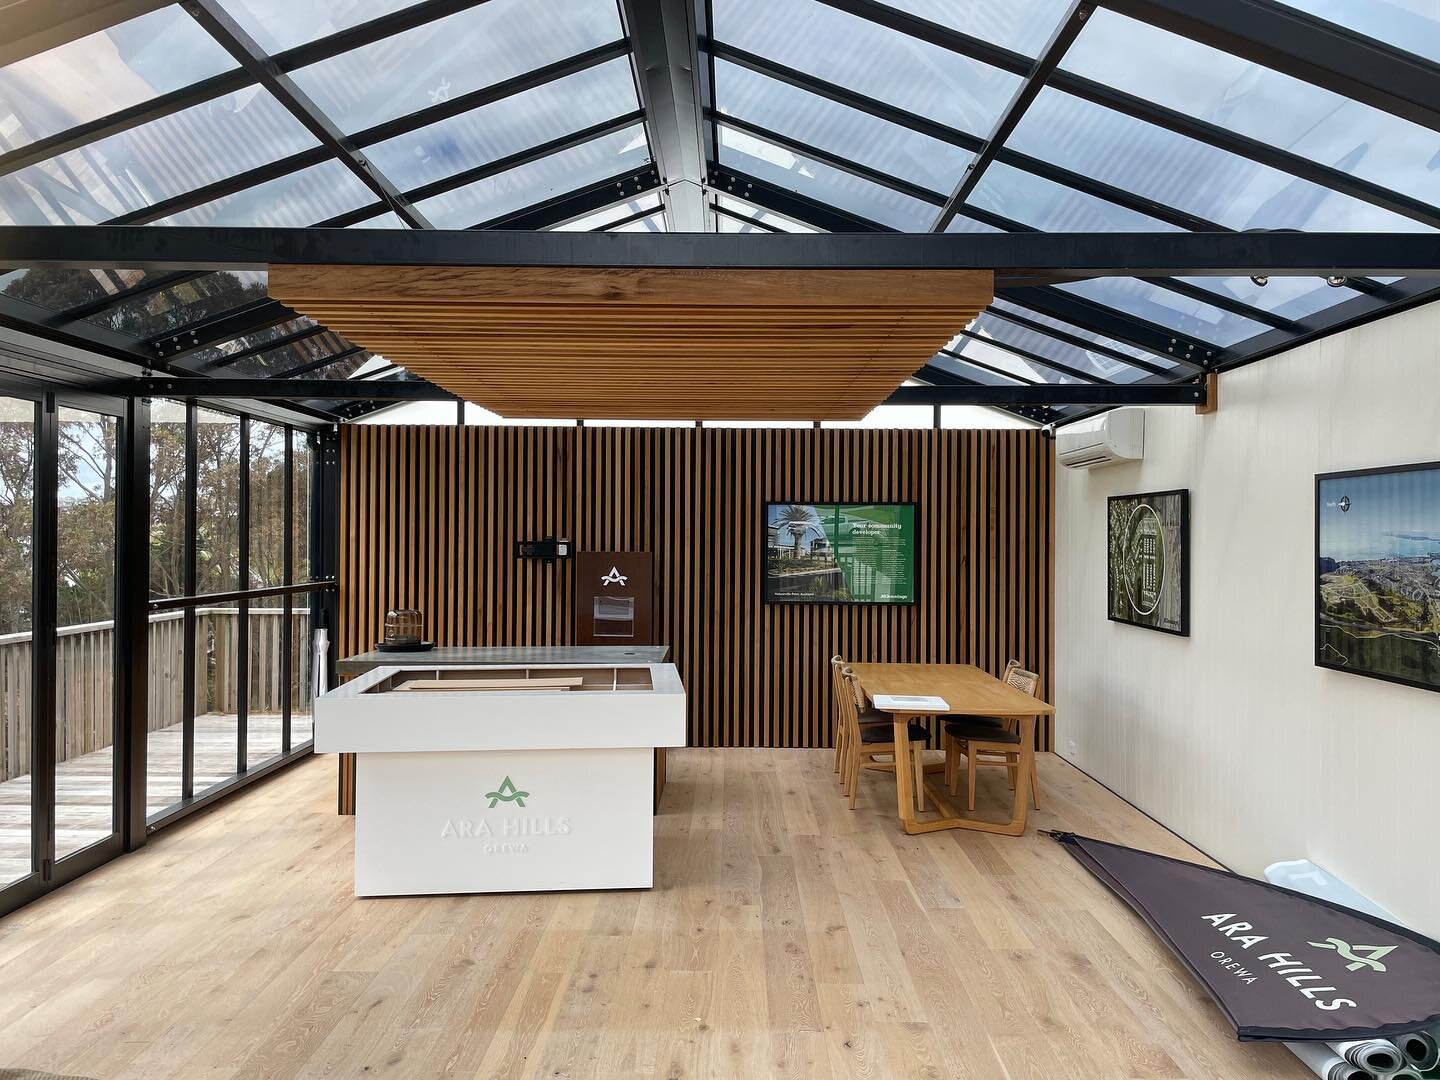 Interior shot
This is an off-grid sales and info centre for the new @avjennings_ltd Ara Hills development. 
Complete with Solar, Batteries, CCTV, Alarm, lighting, heat pump and Generator backup.
#Arahills